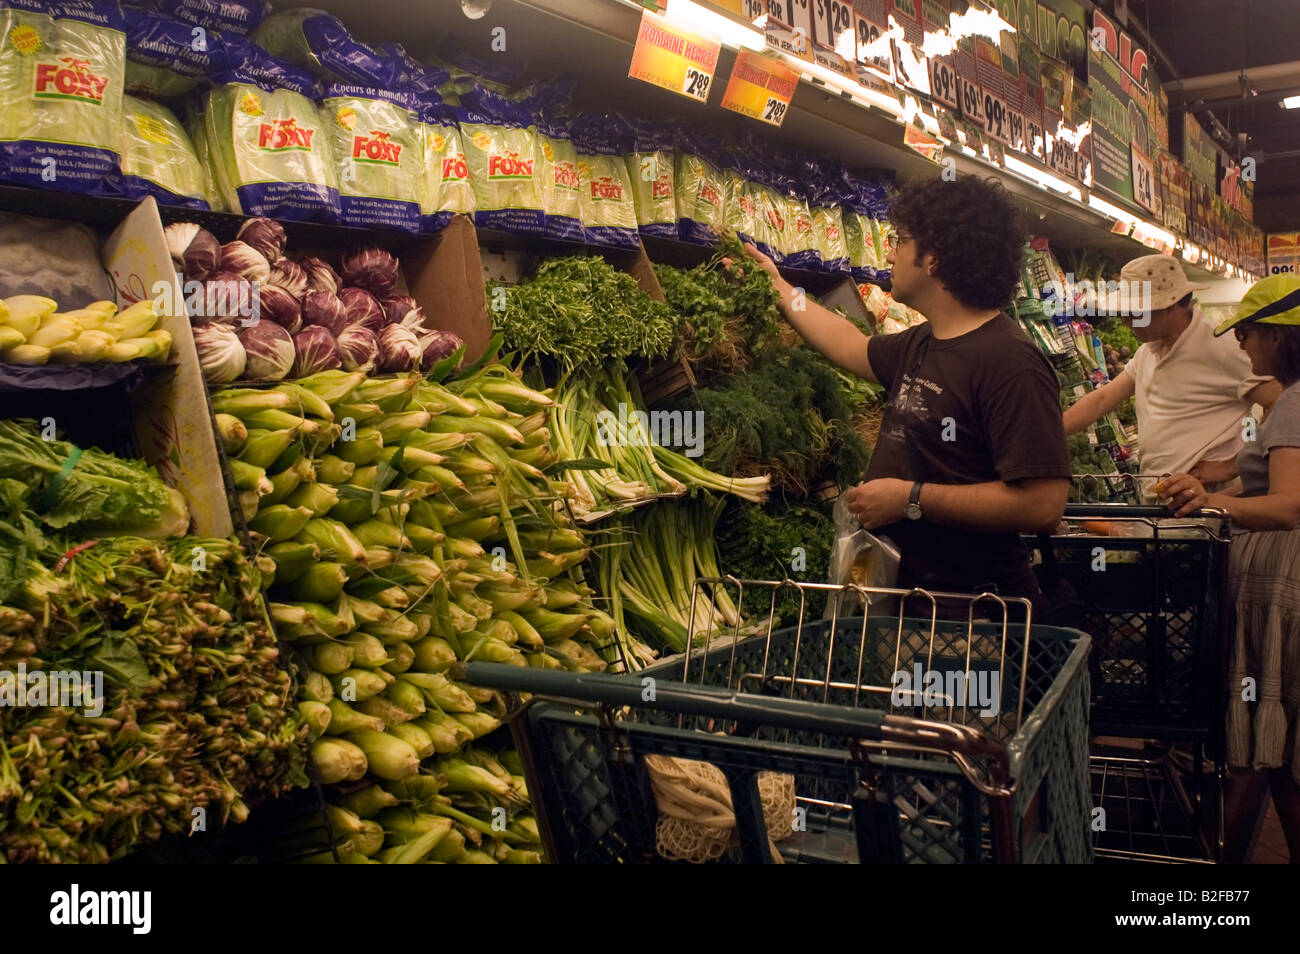 Customers shop for produce at lower prices in the Fairway supermarket in the Red Hook neighborhood of Brooklyn in New York Stock Photo